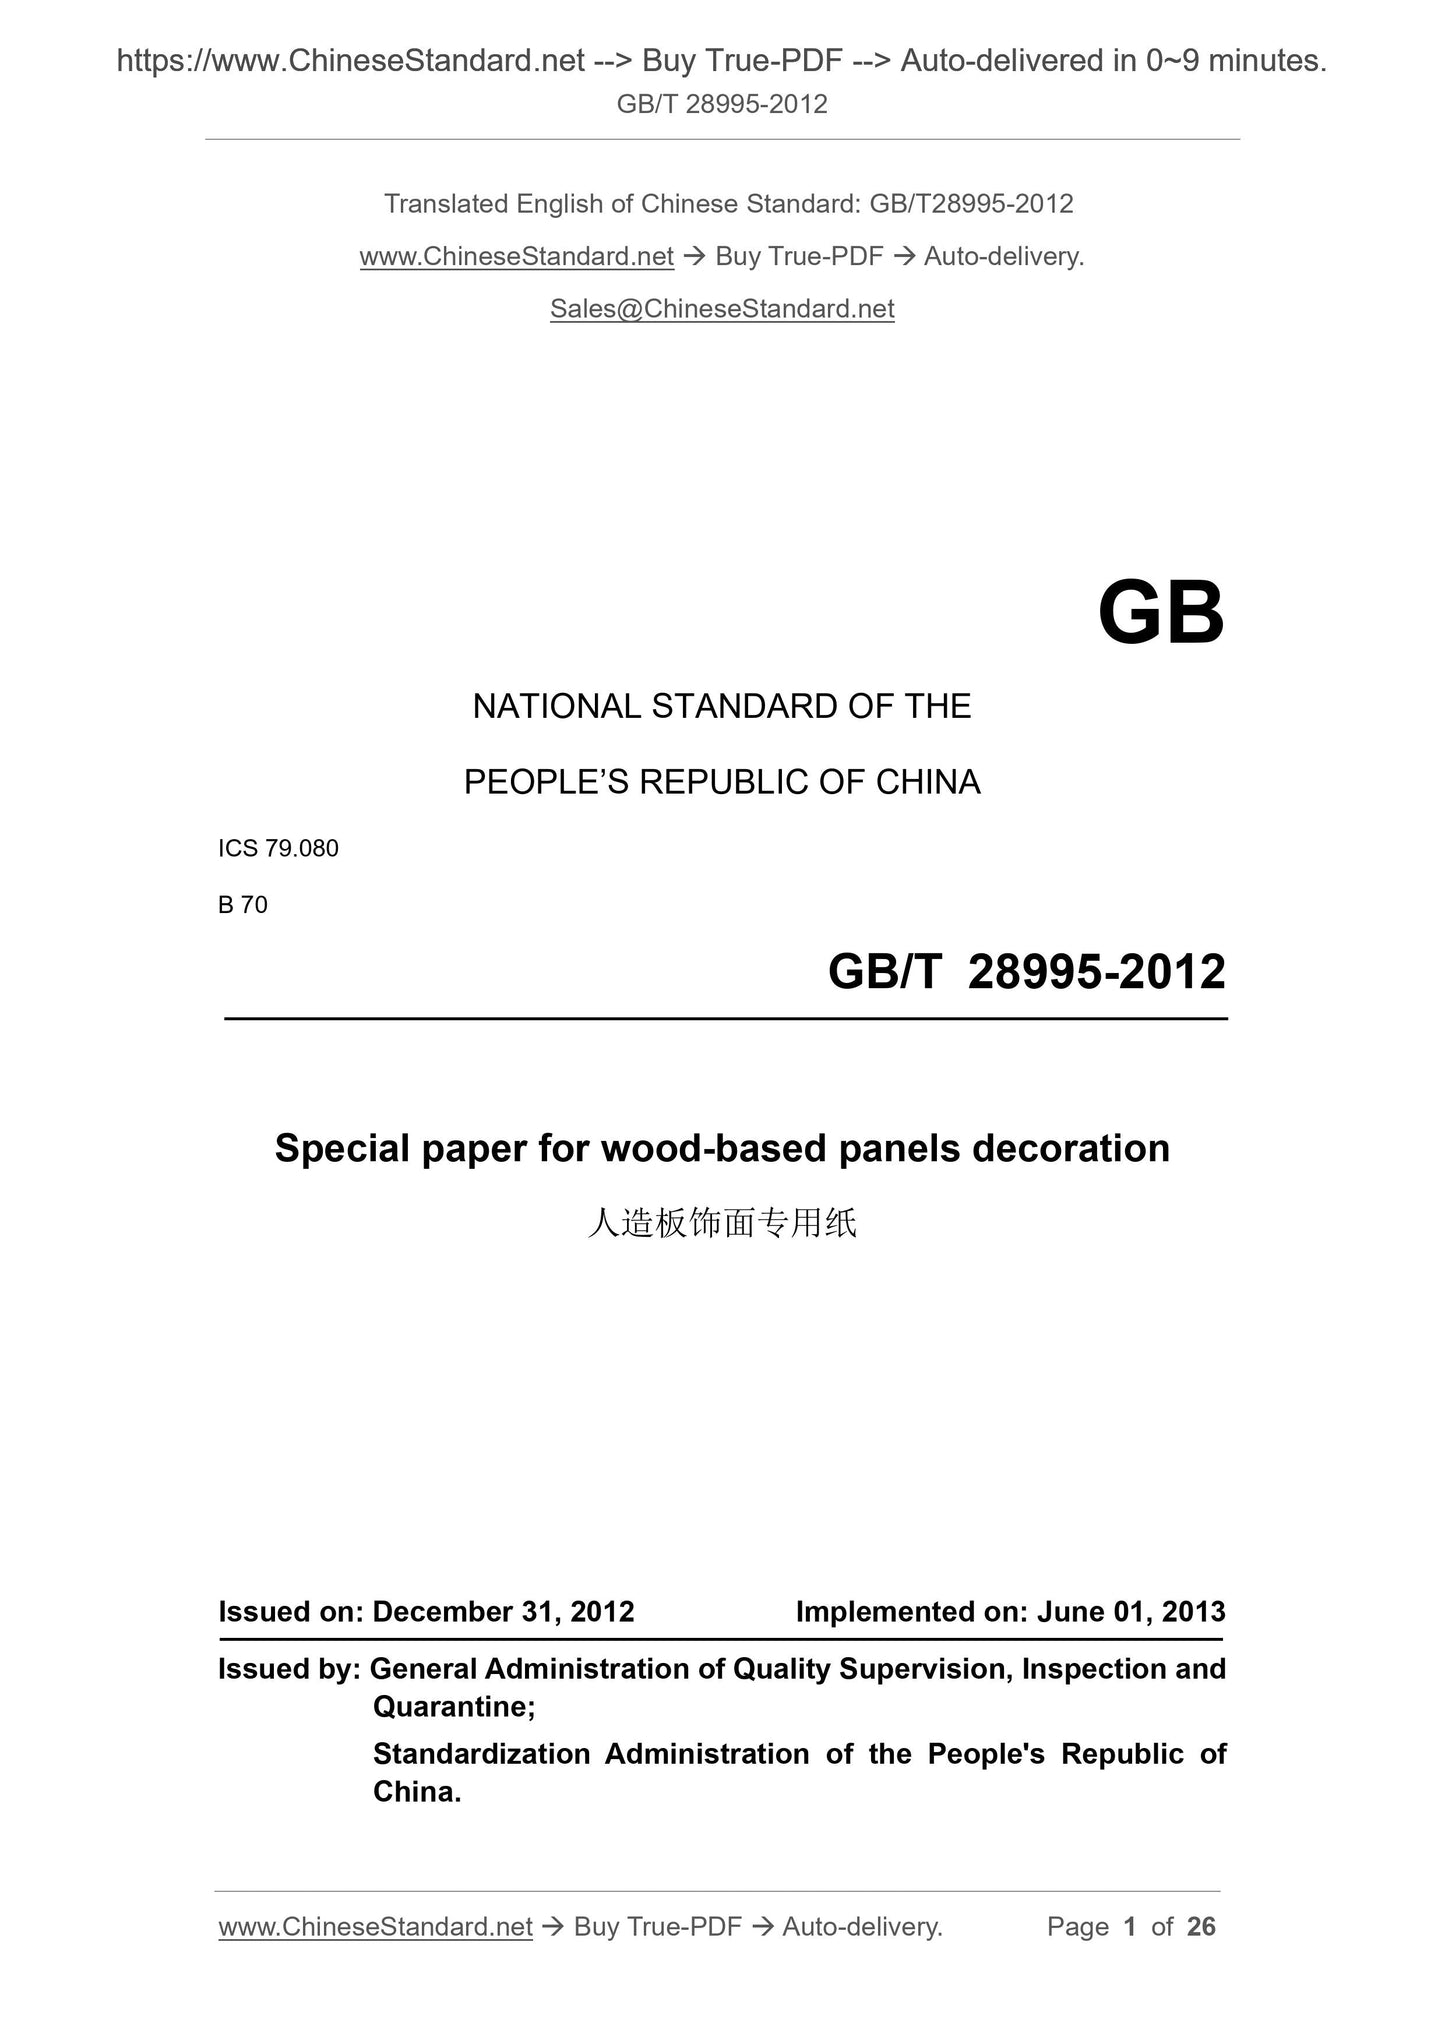 GB/T 28995-2012 Page 1